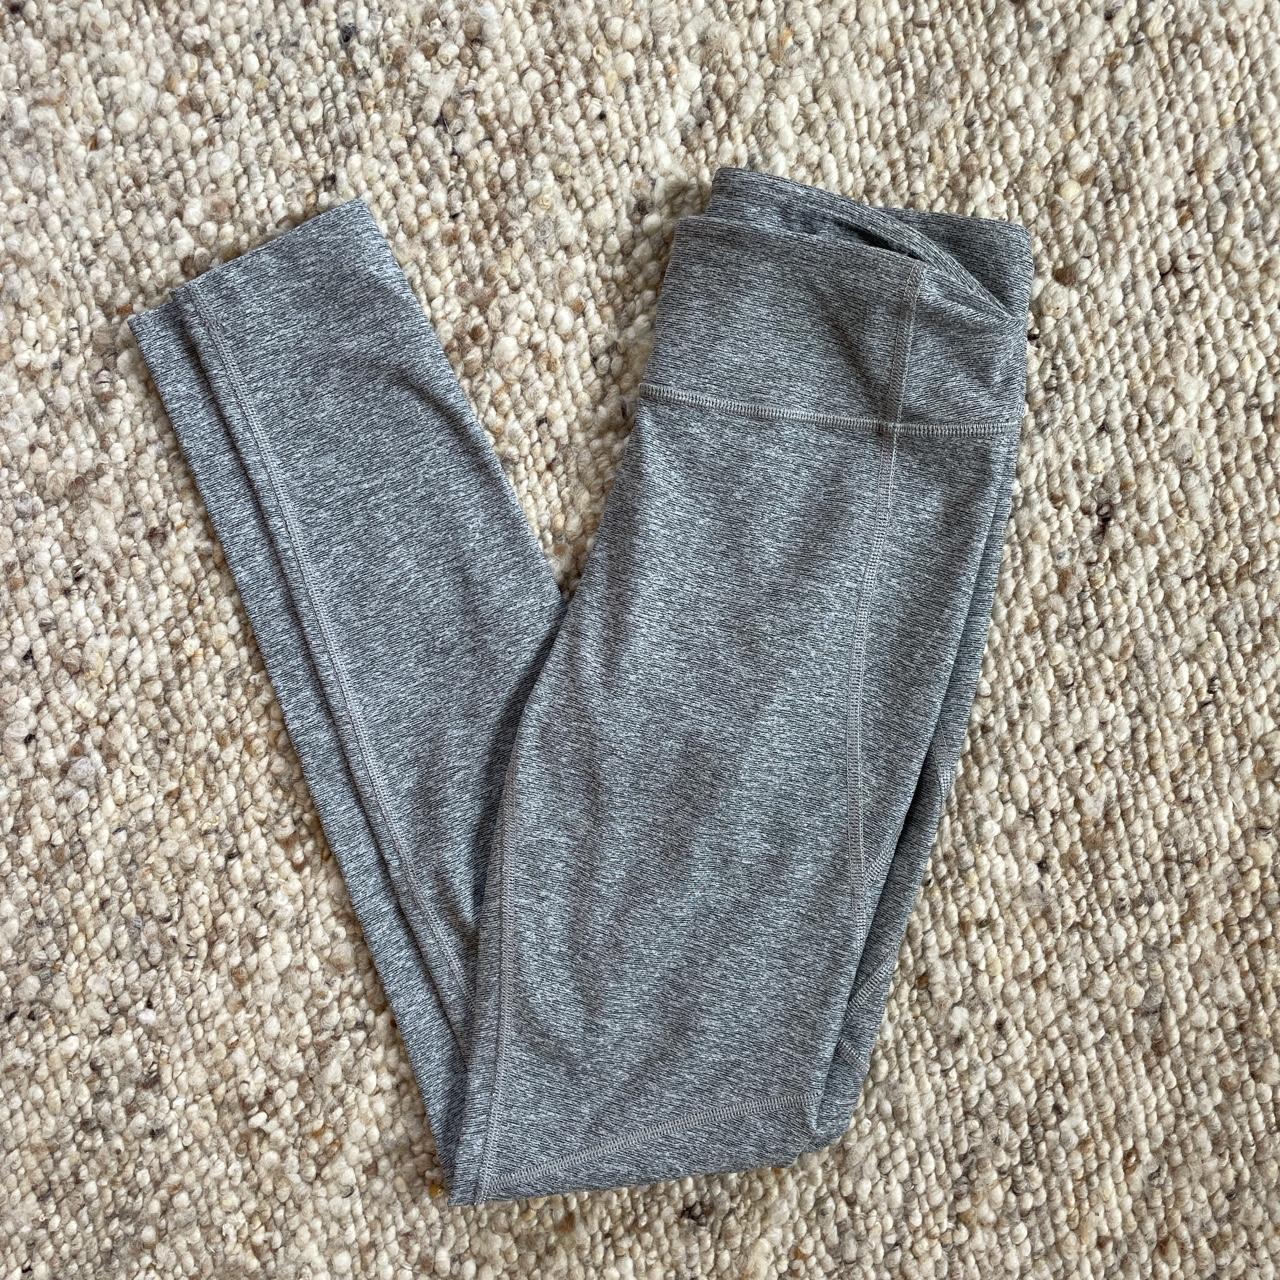 Outdoor Voices 7/8 Warmup Leggings in Charcoal - Depop